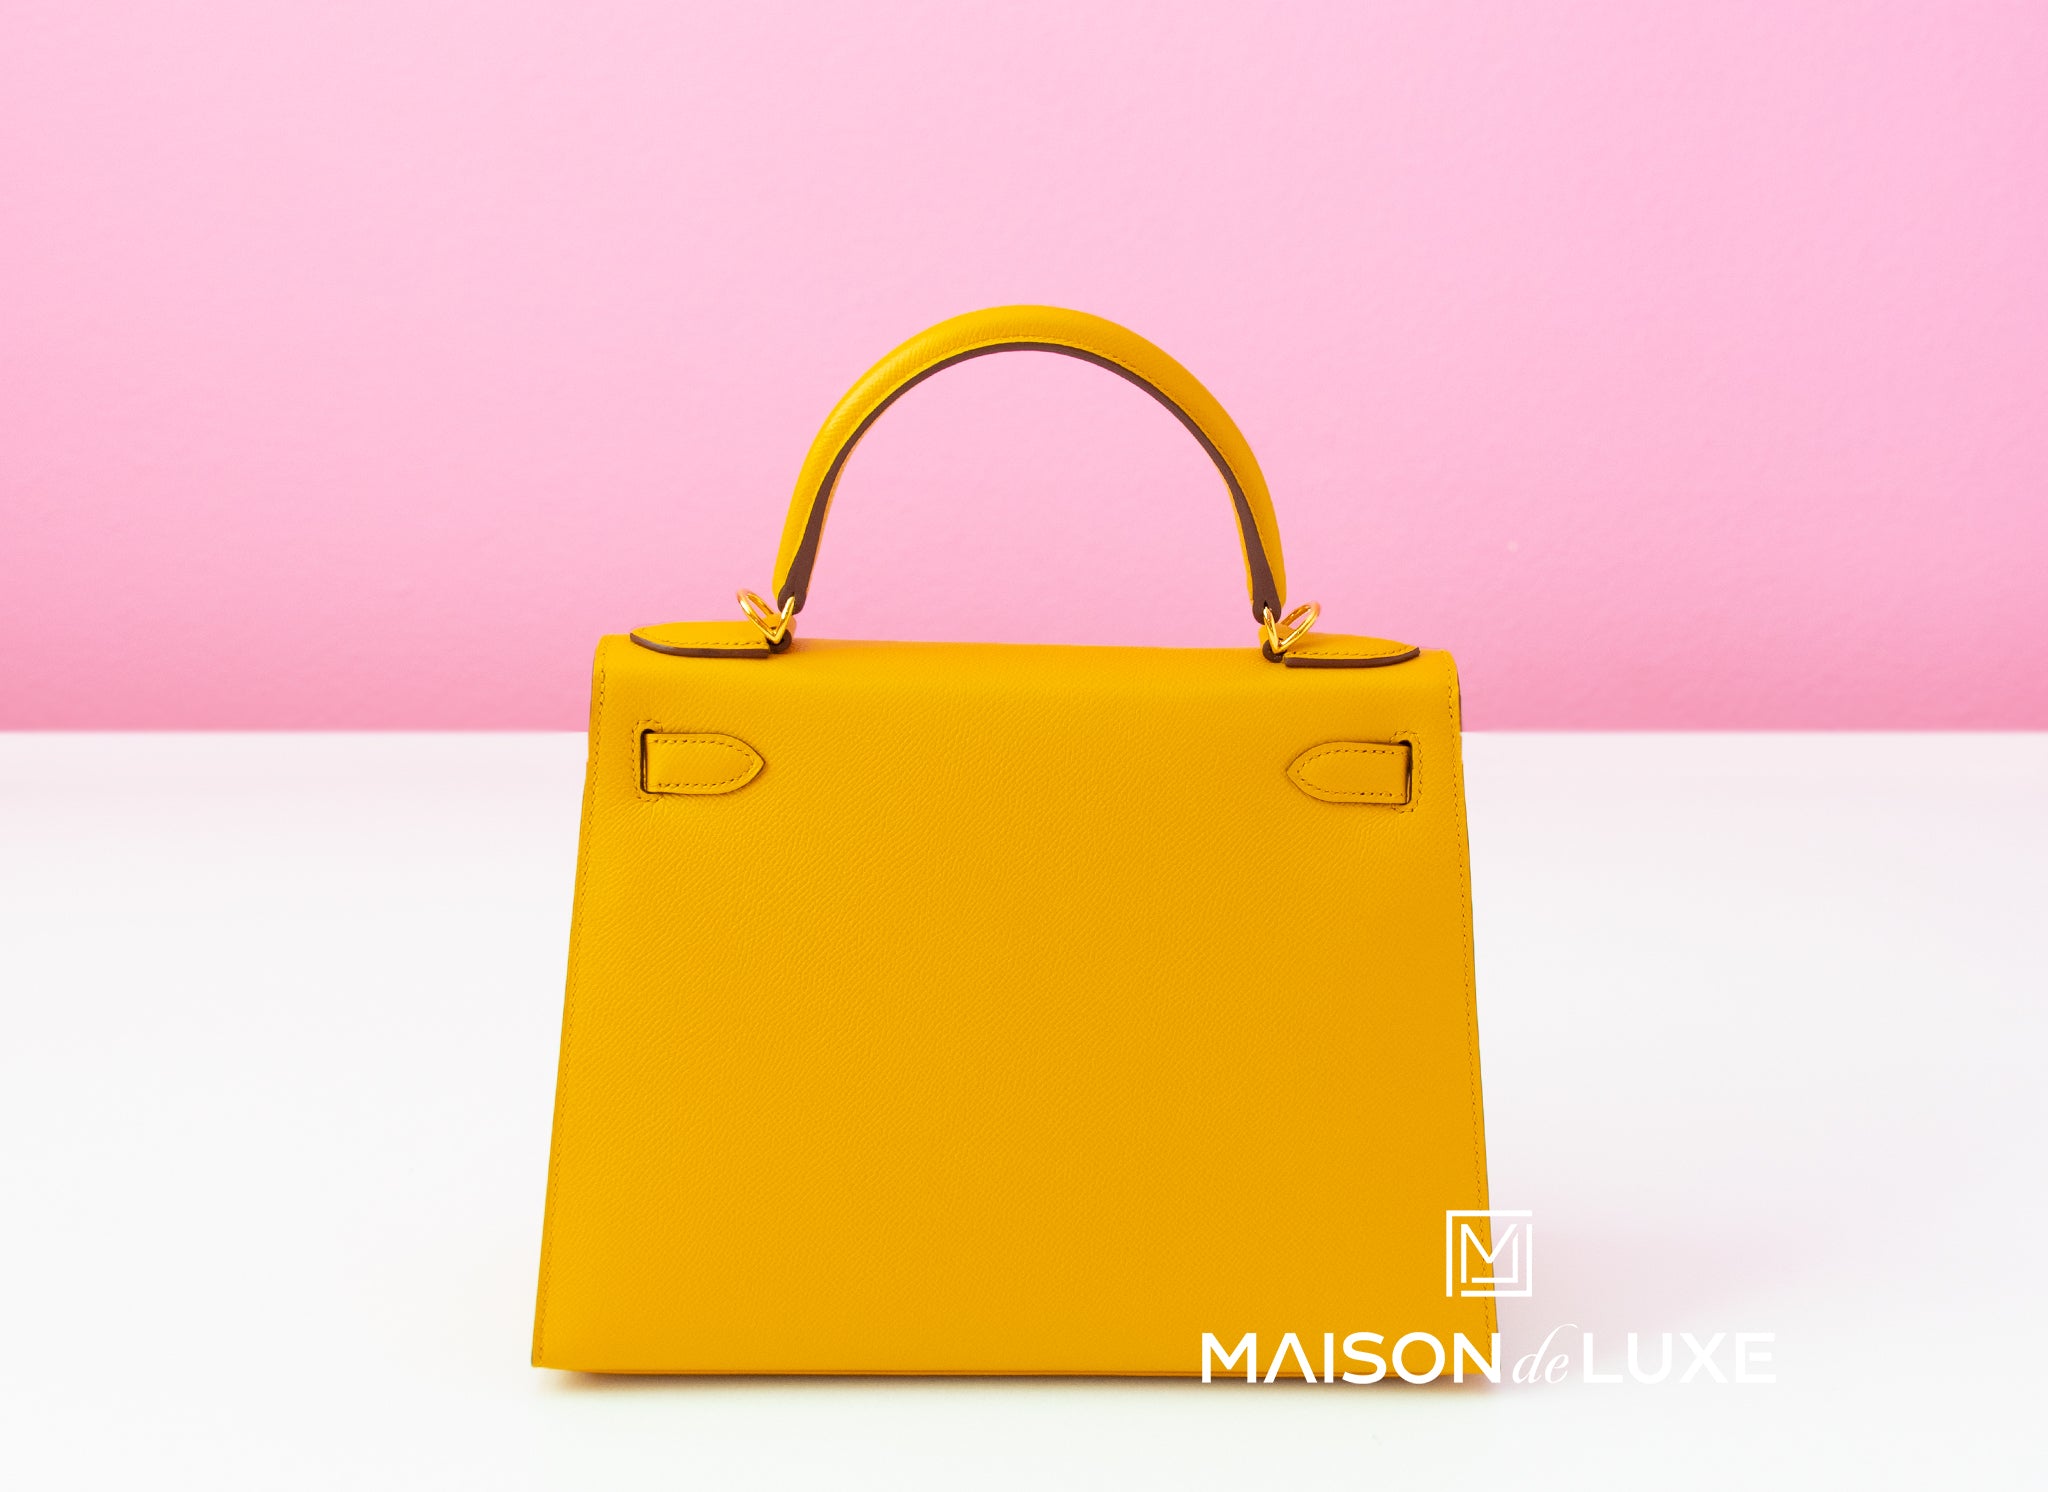 This stunning Hermès Kelly 28cm bag is featured in Jaune Ambre color. This  bag is made from Epsom leather, which is very sof…